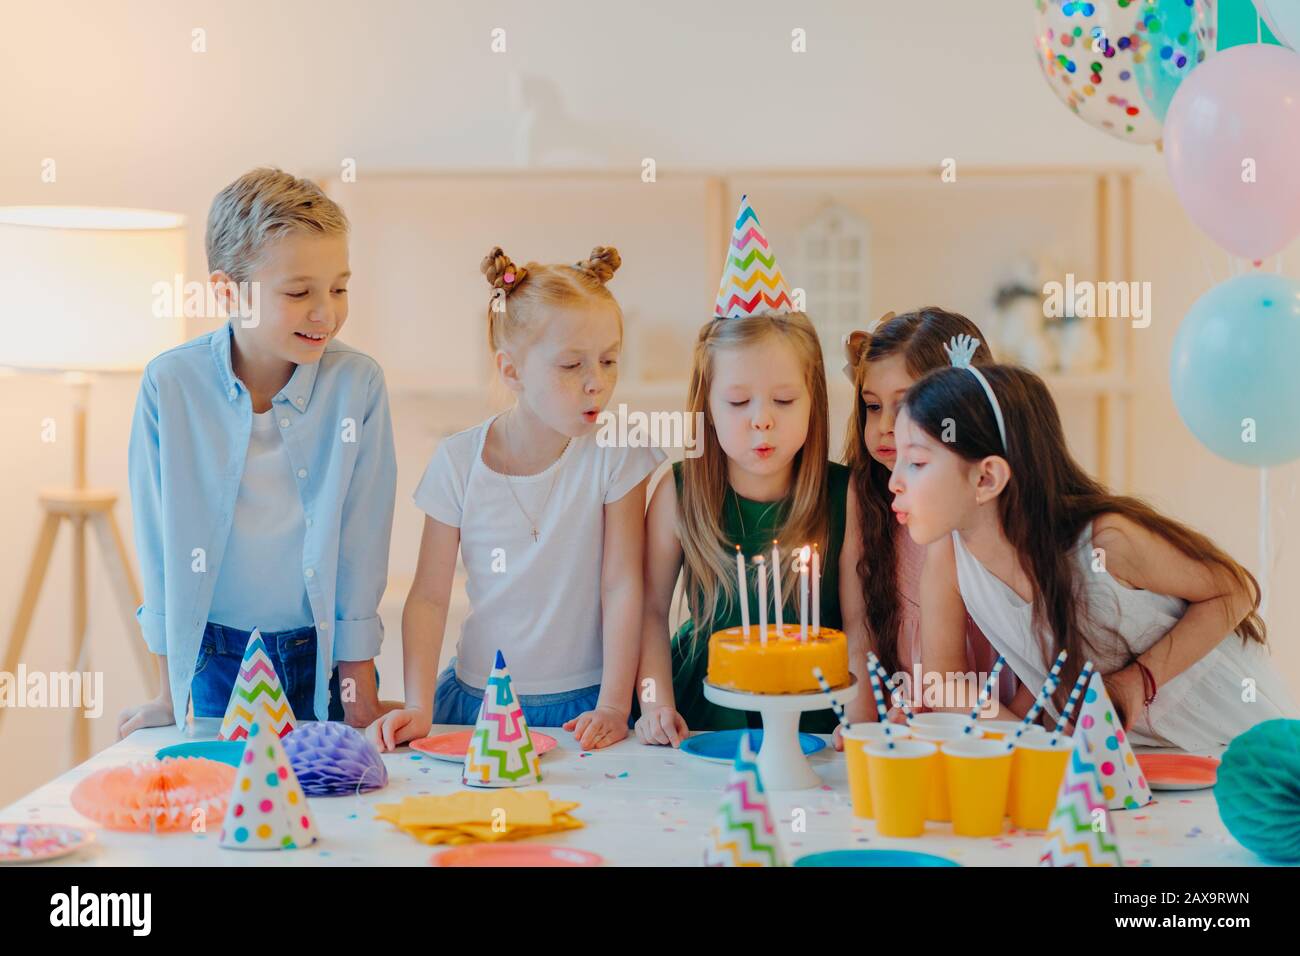 Small kids celebrate birthday party, blow candles on cake, gather at festive table, have good mood, enoy spending time together, make wish, wear party Stock Photo